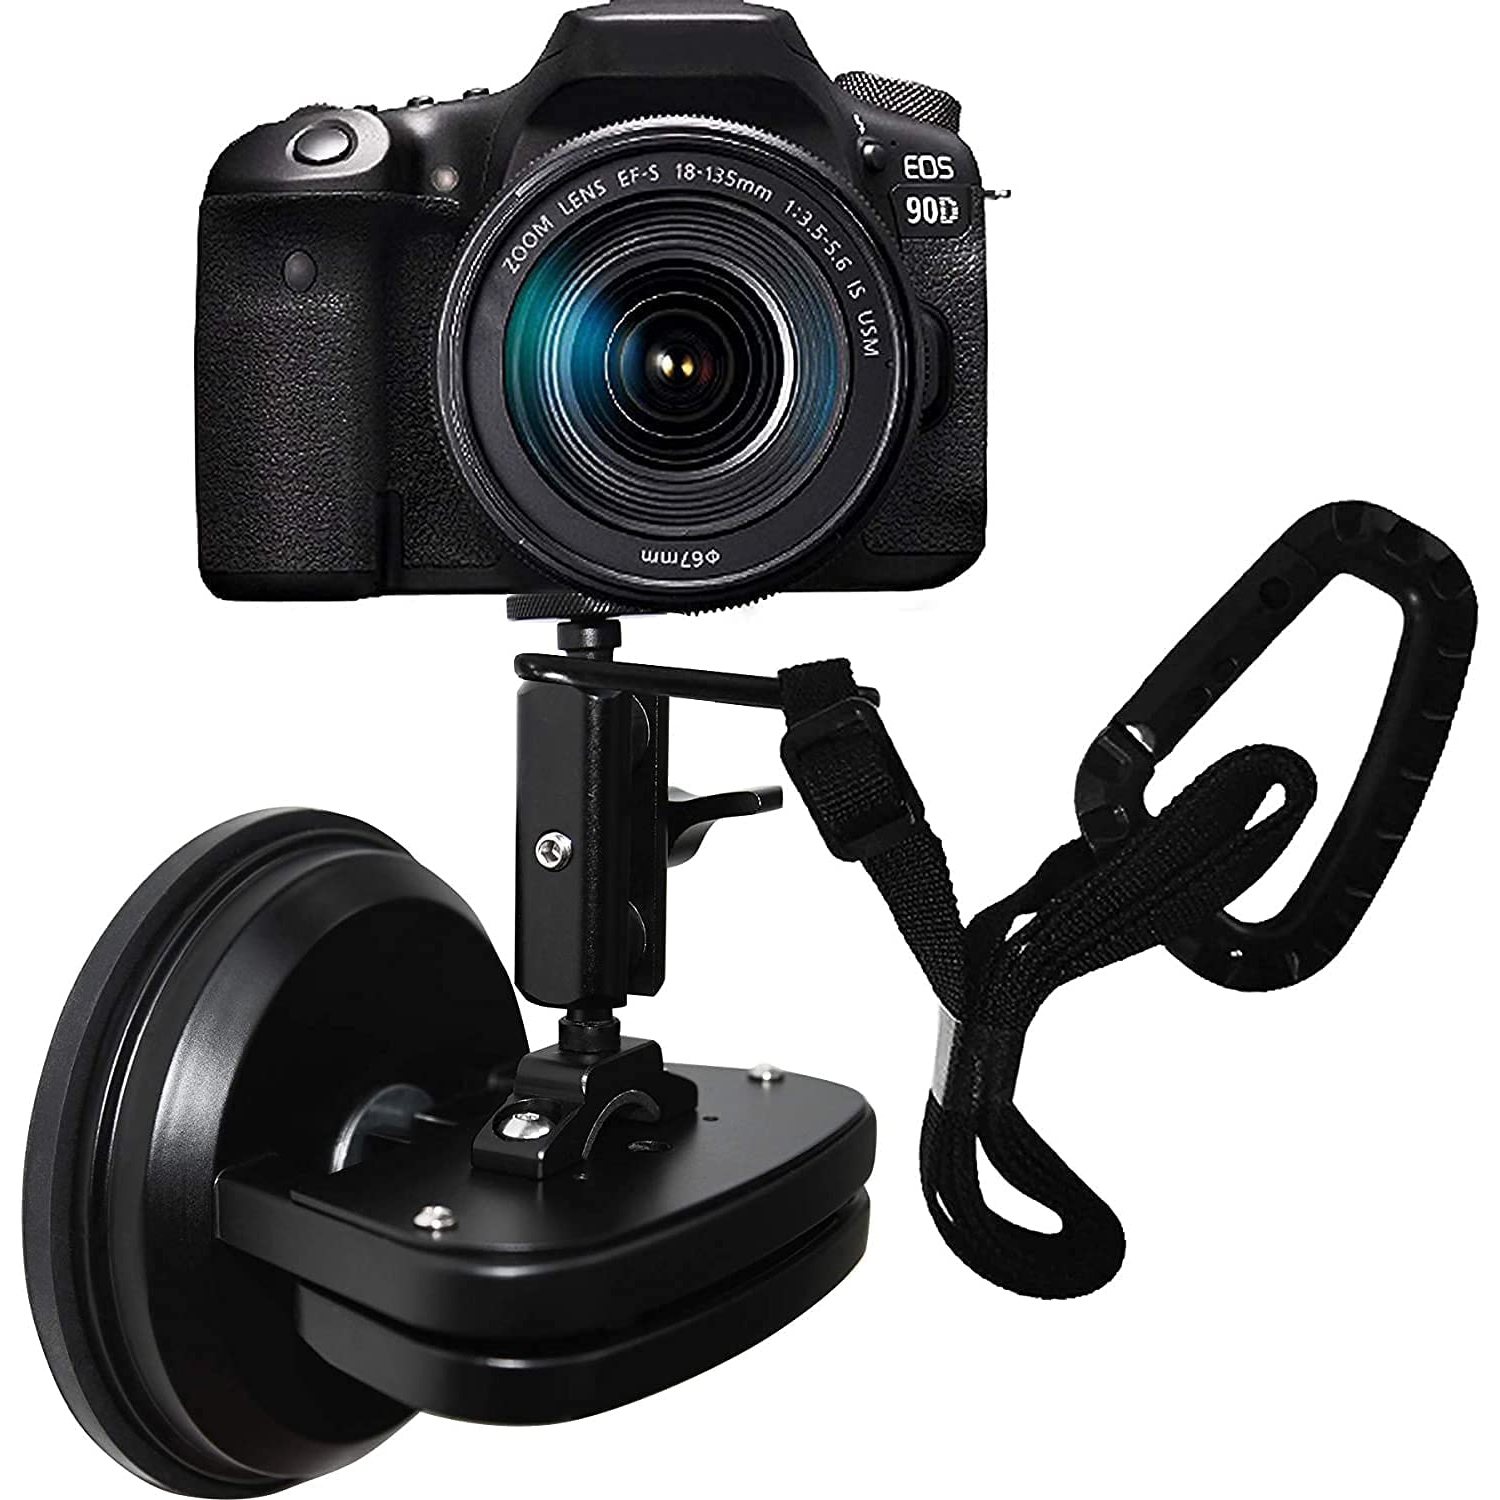 Suction Cup Mount for Heavy Duty DSLR/NuCam WR/Gopro, Strong 5' Diameter Suction Base ABS, Perfect for Car/Boat/Frame/Window, Aluminum with 360° Camera Rotation Ball Head (Do